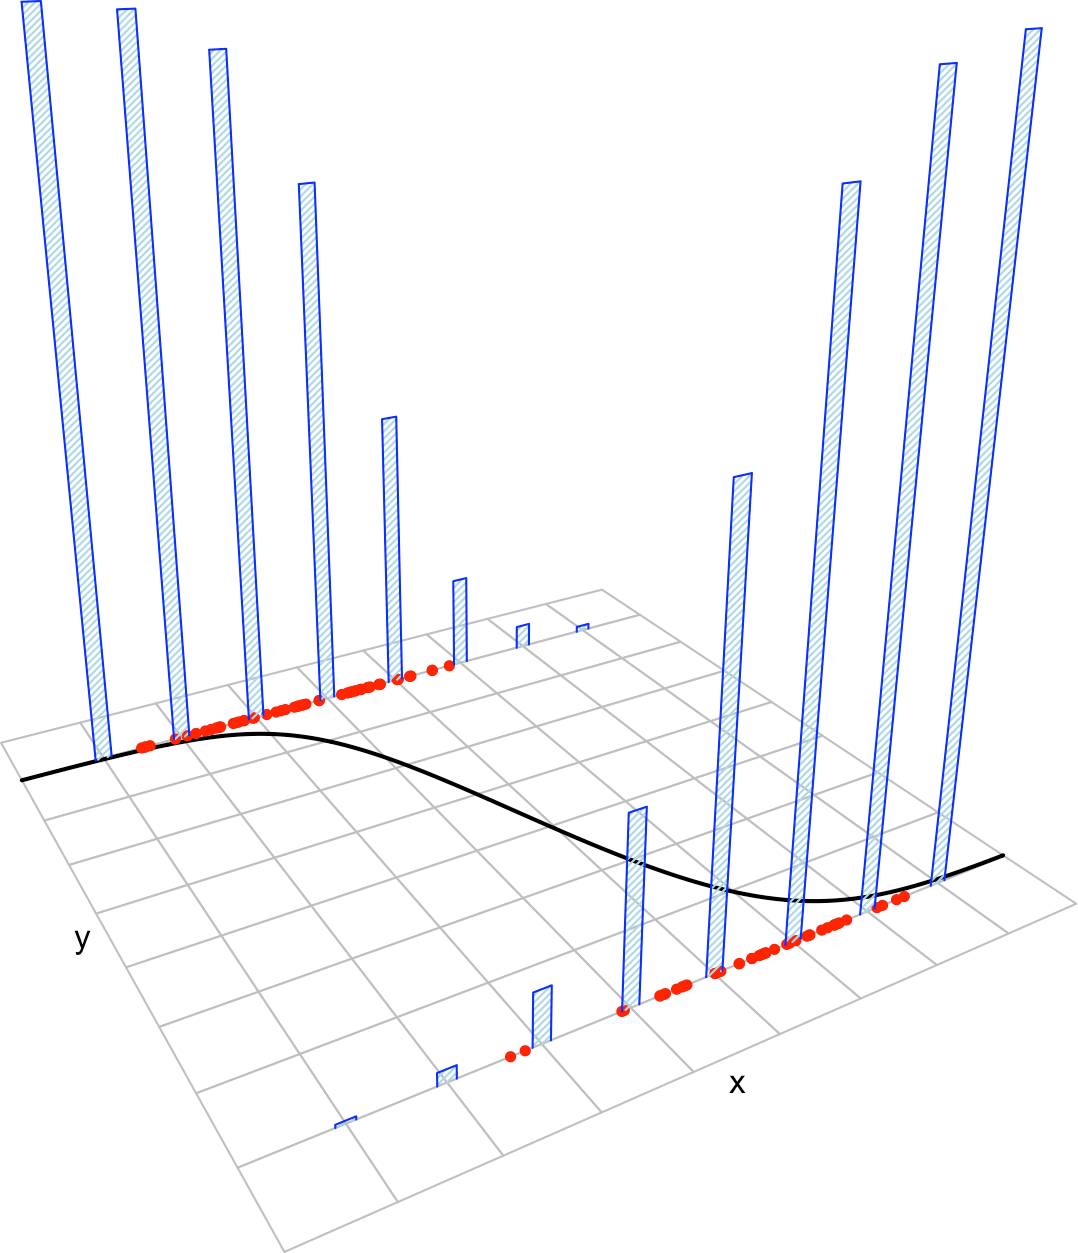 The key concepts of the logistic model. The blue bars represent the conditional distribution of probability of \(Y\) for each cut in the \(X\) axis. The red points represent data following the model.